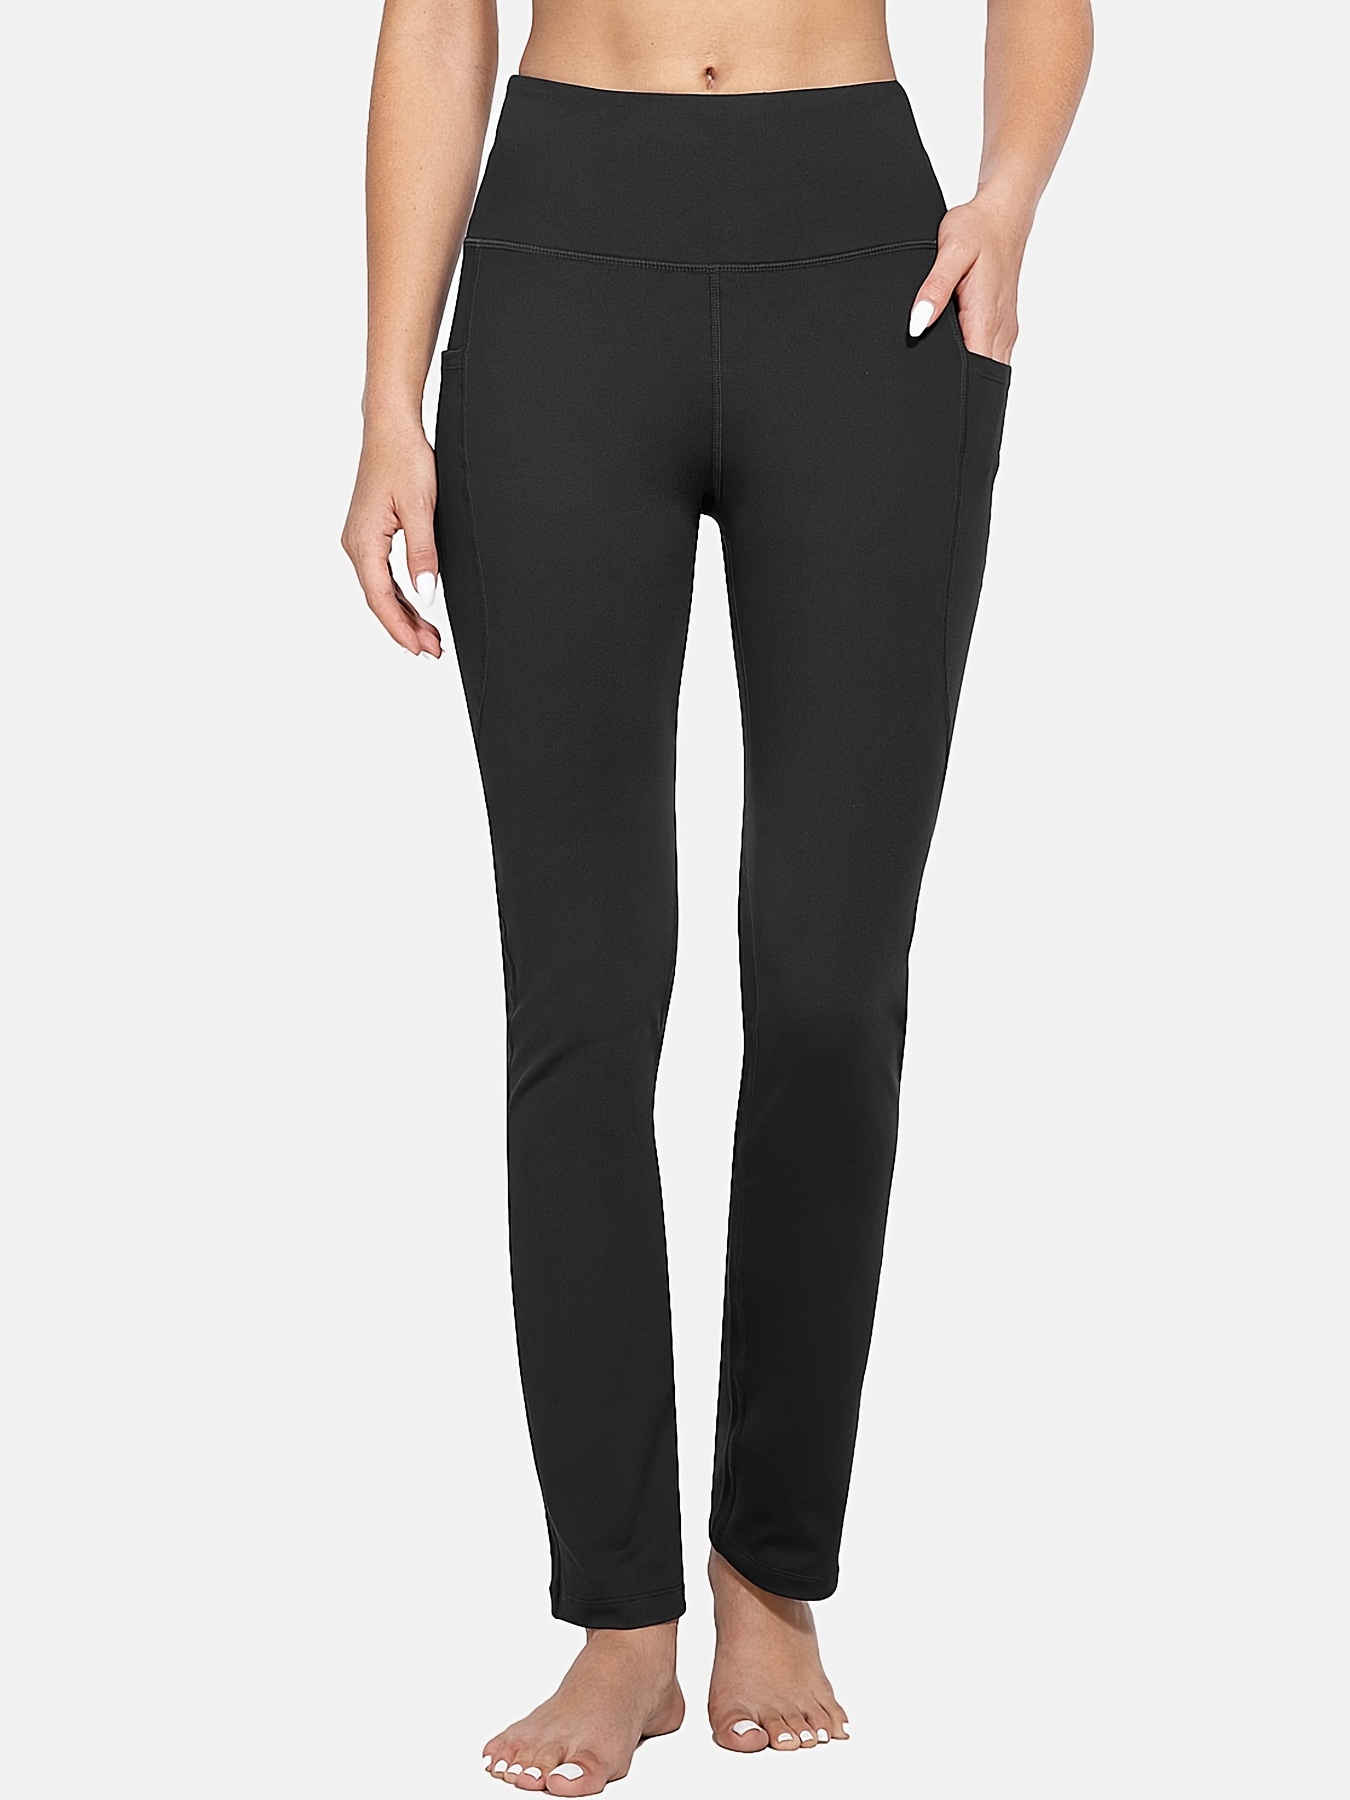 BALEAF Women's Flare Leggings with Pockets, Philippines